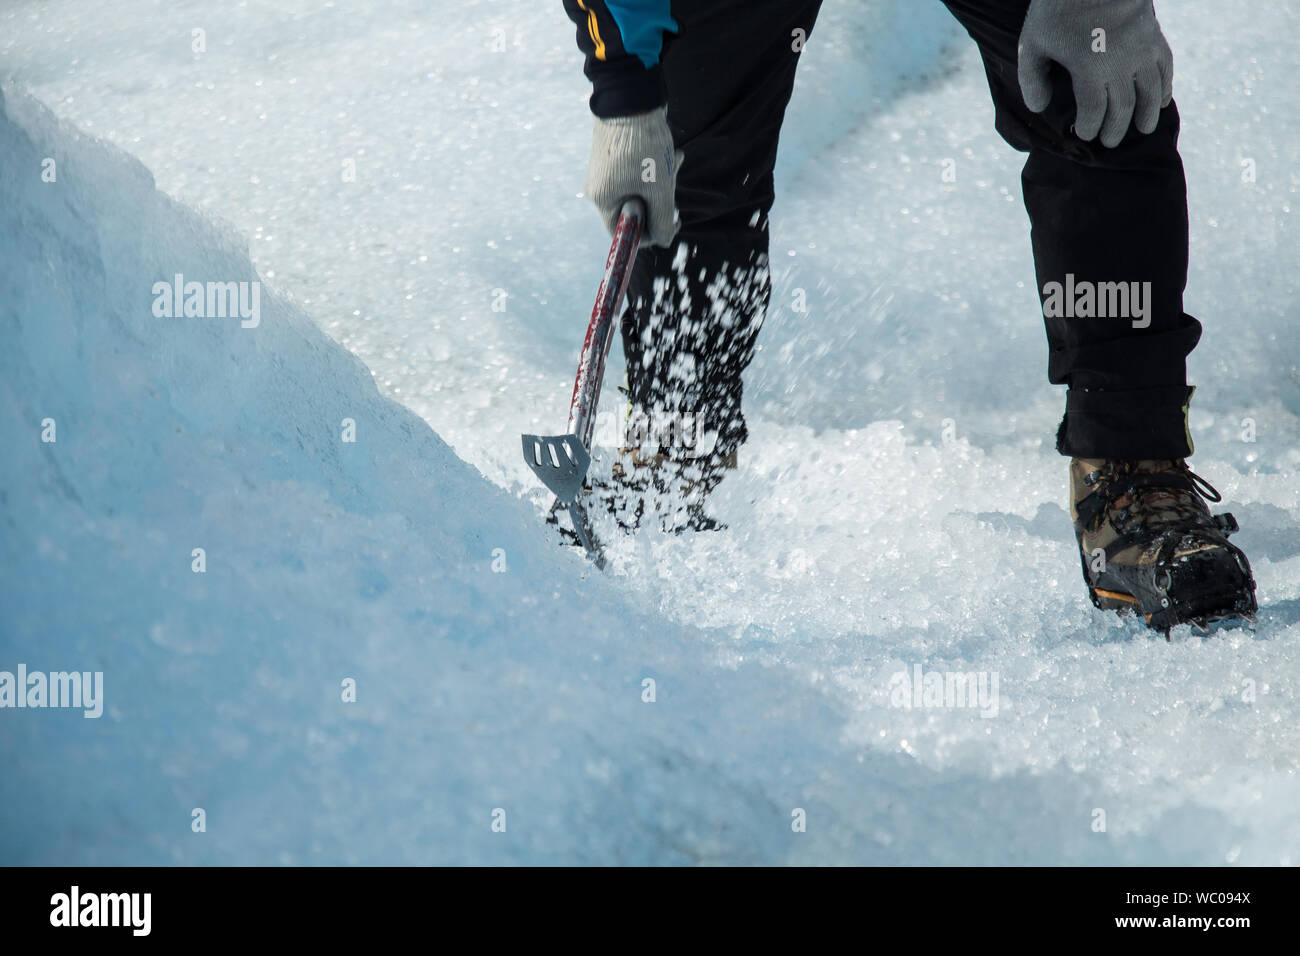 Low Section Of Man Striking Ice With Adze Stock Photo